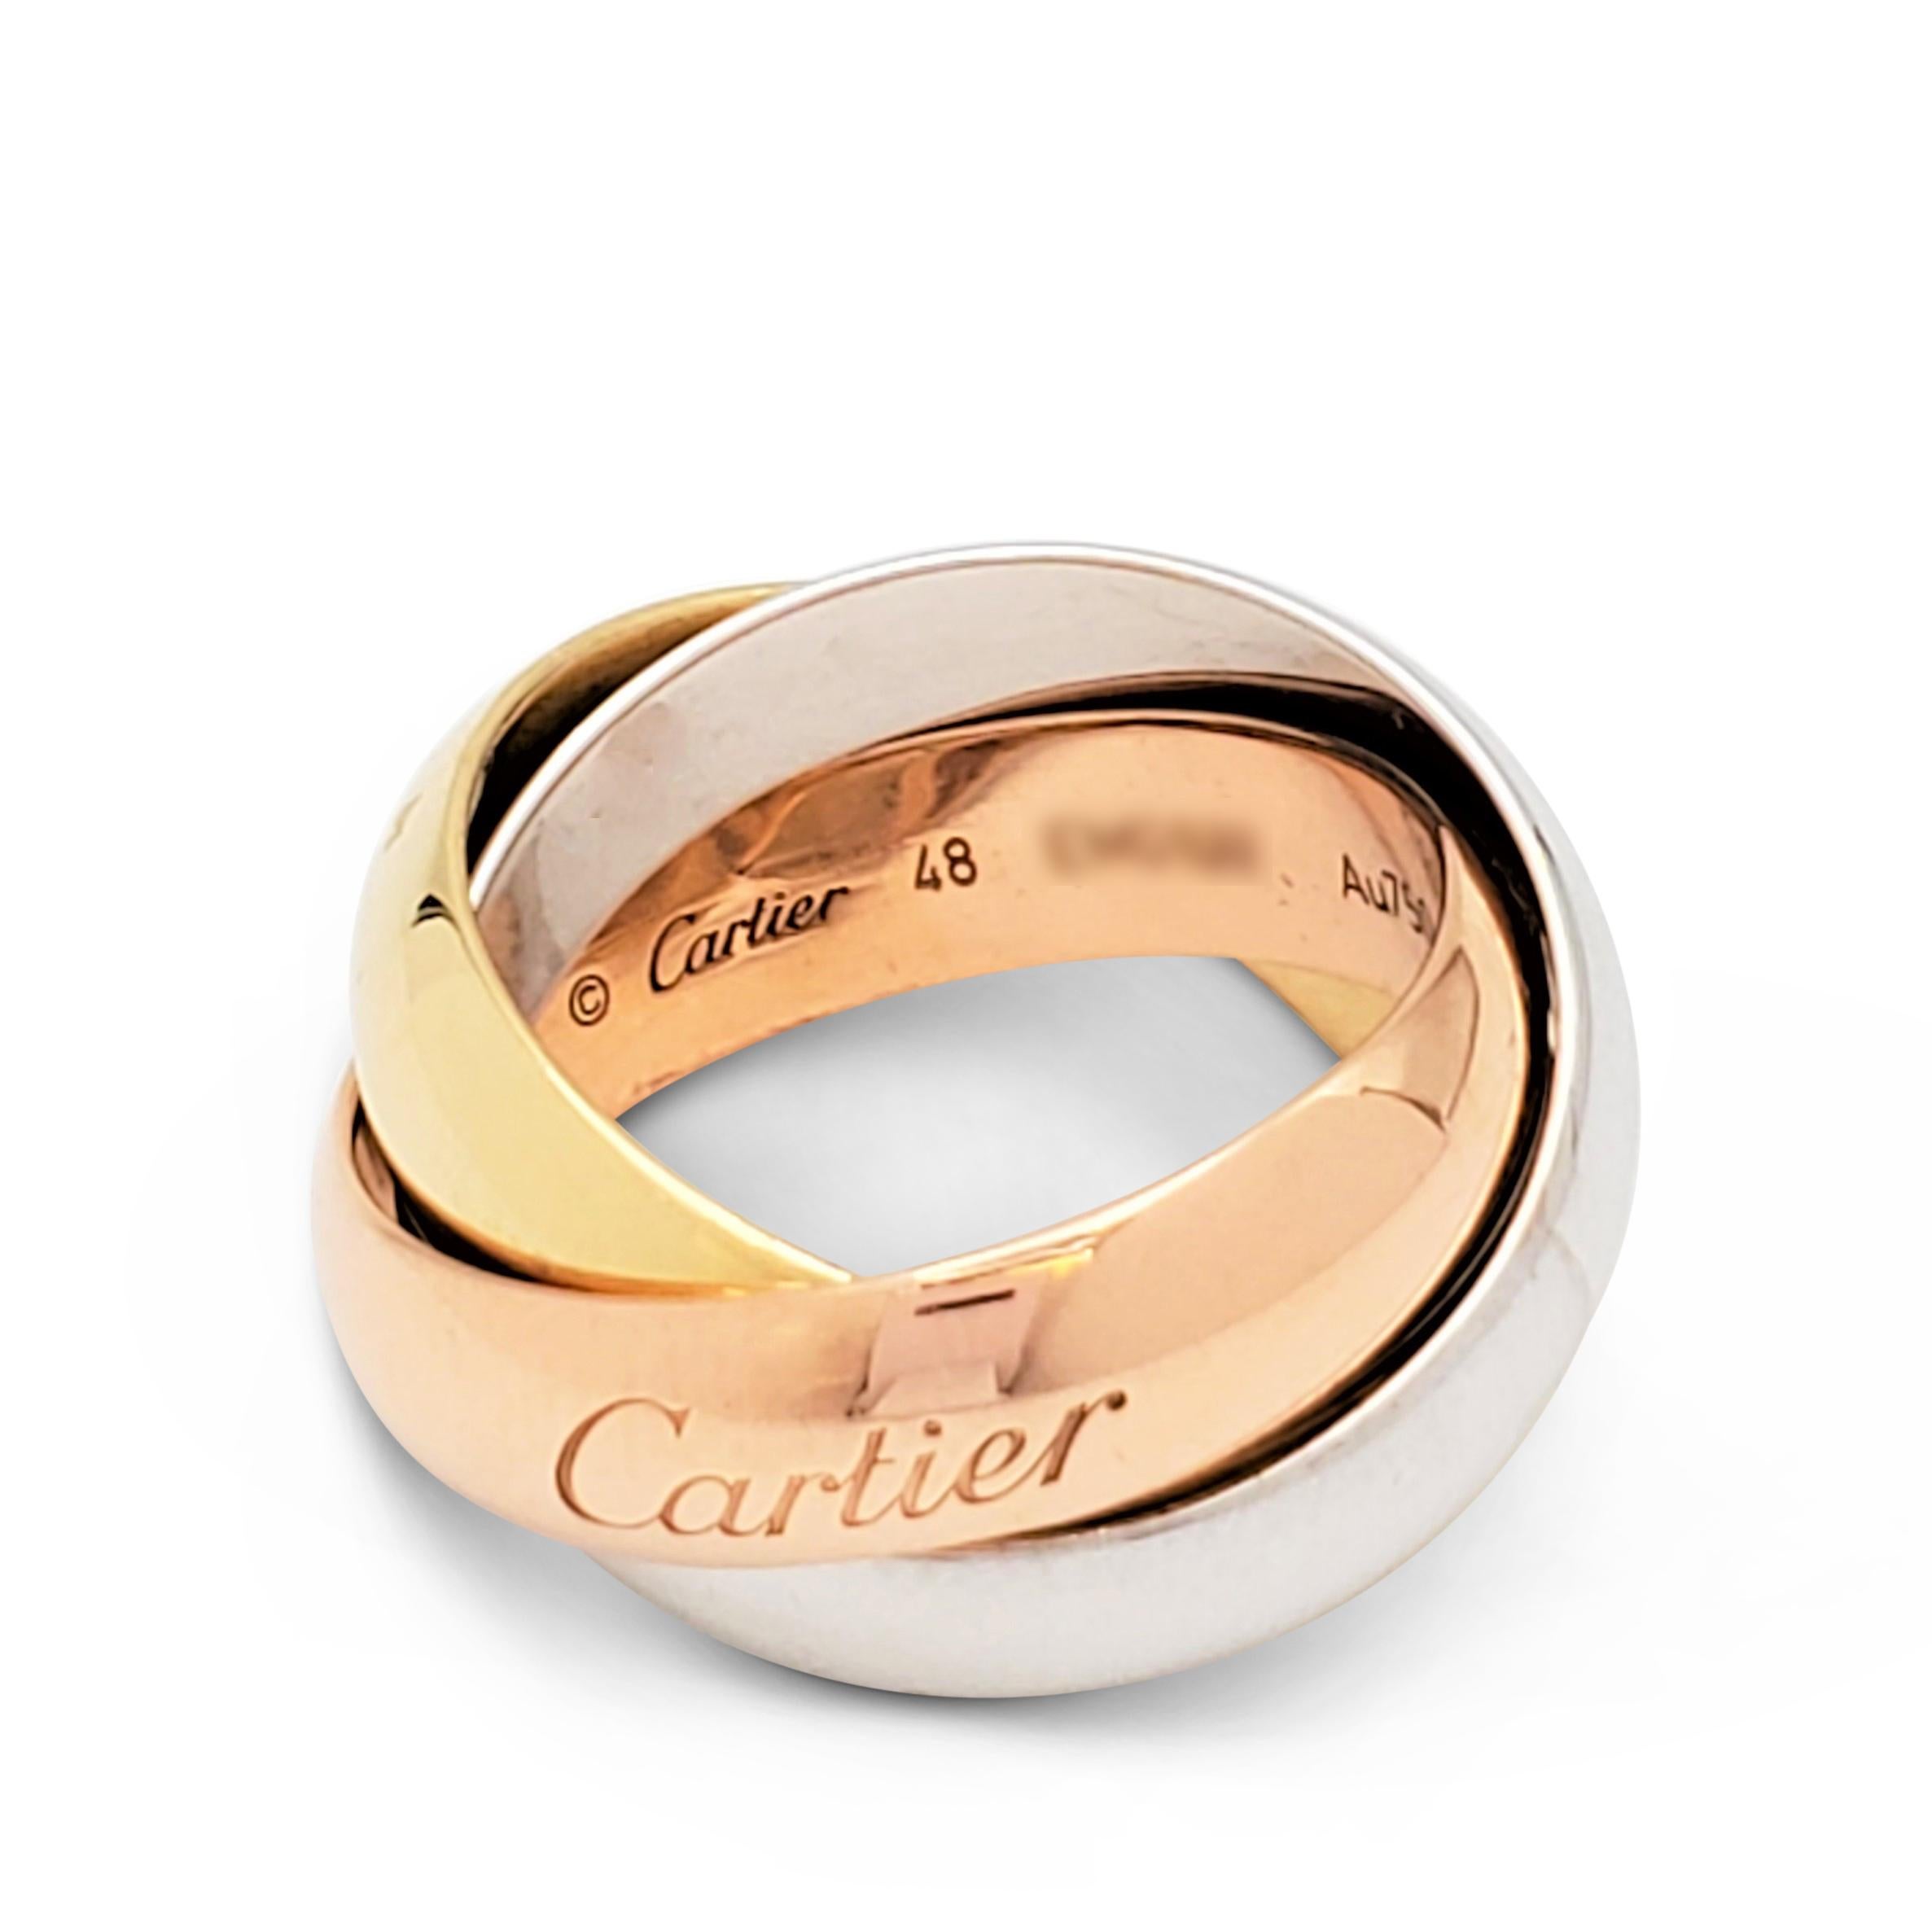 Authentic Cartier 'Trinity' ring comprised of interlocking bands of 18 karat yellow, rose, and white gold. Signed Cartier, Au 750, 48, with serial number. Ring size 48 (US 4 1/2). Each band measures 5.0 mm wide. Presented with the original box, no